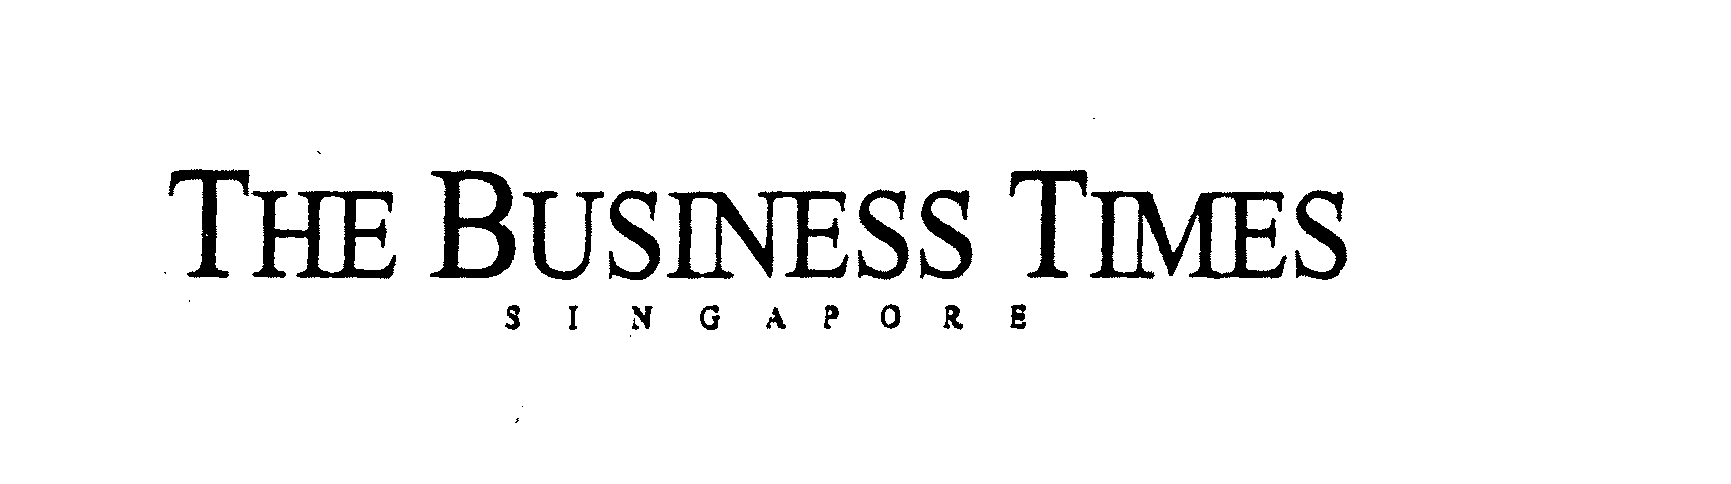 Trademark Logo THE BUSINESS TIMES SINGAPORE